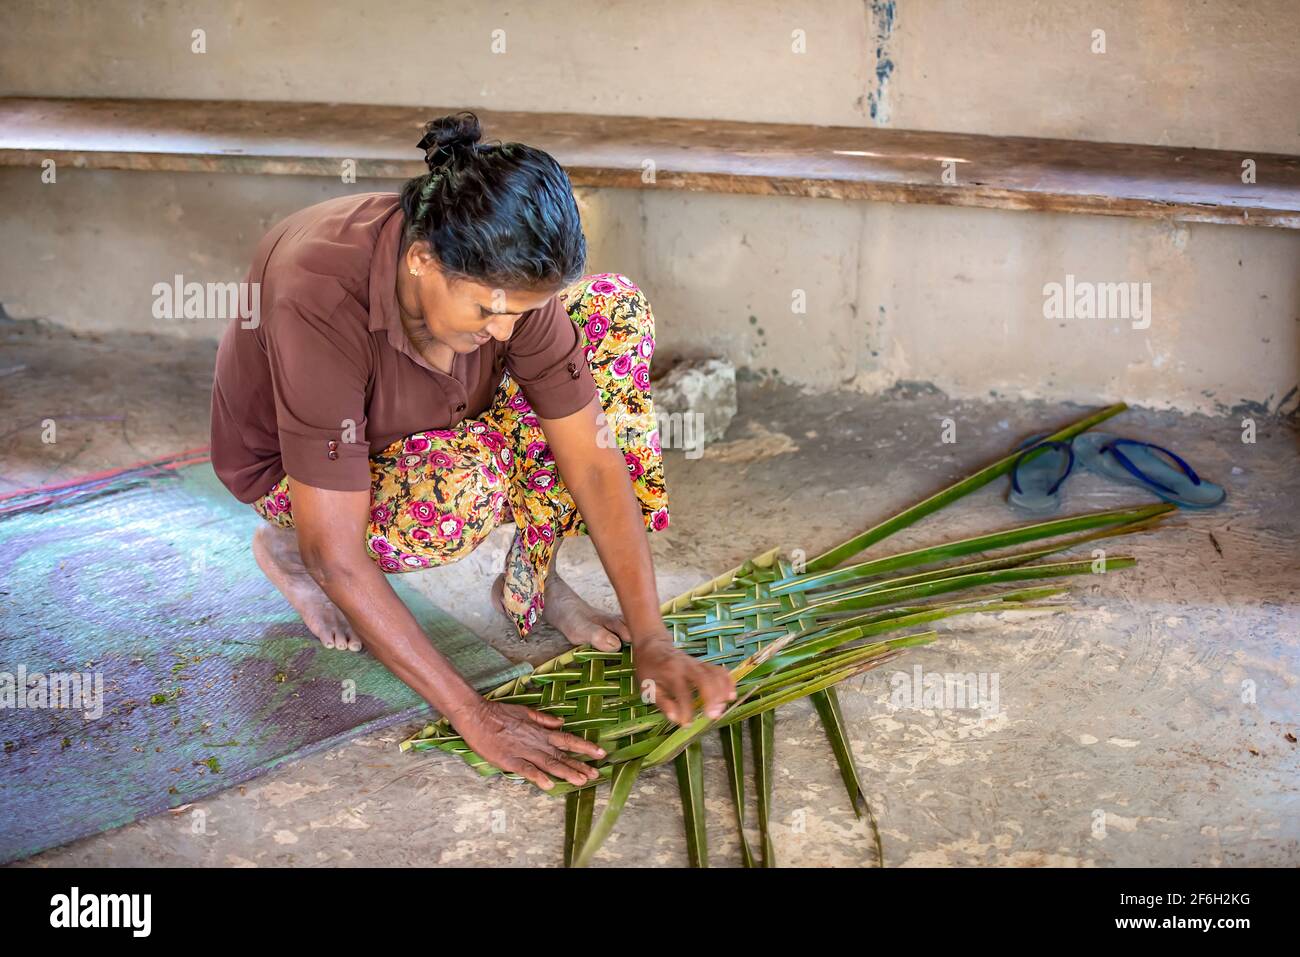 BENTOTA, SRI LANKA - 14 NOVEMBER, 2019: A woman resident of the island of Sri Lanka weaves a fragment of a roof from a palm leaf Stock Photo